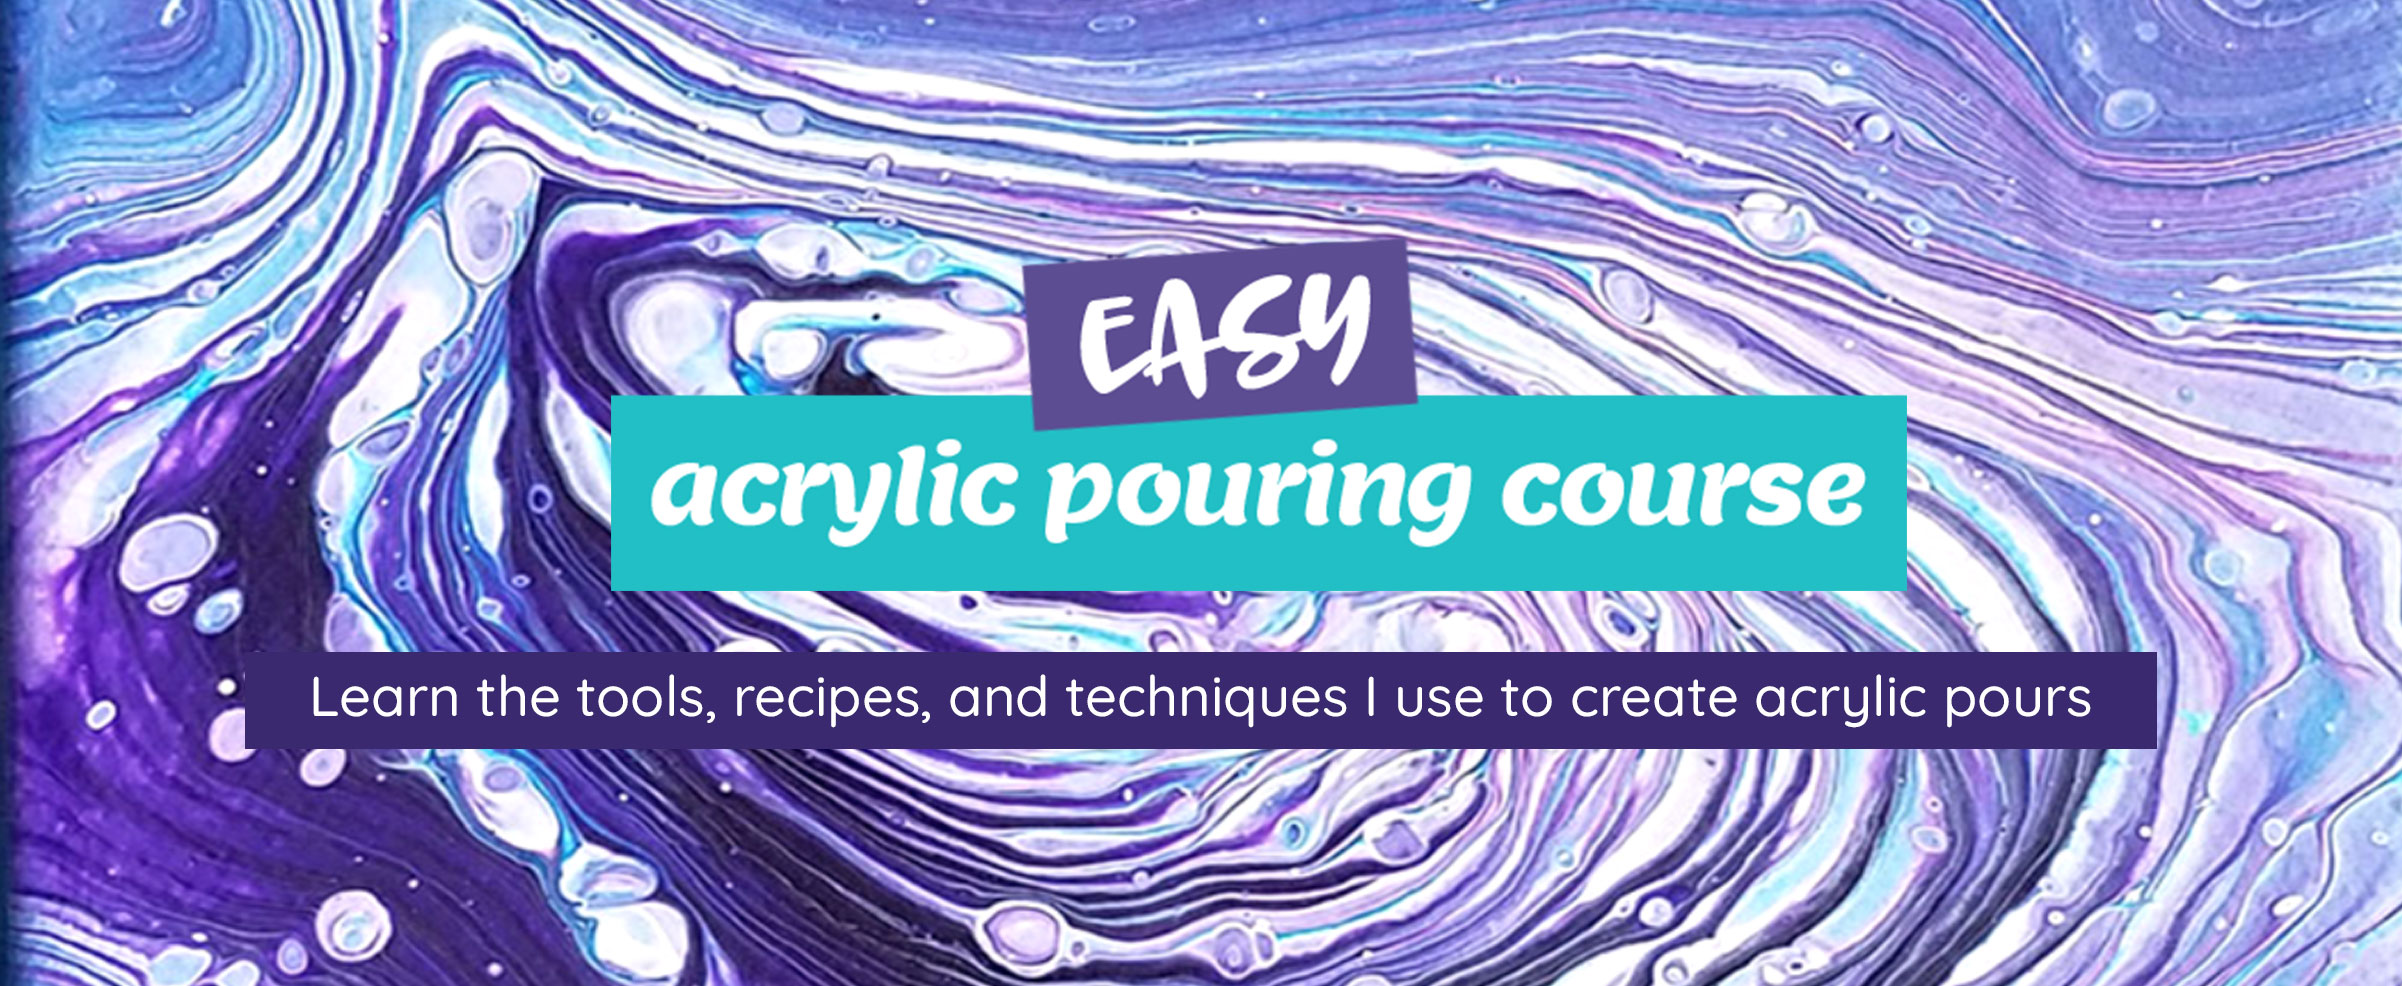 easy acrylic pouring course for beginners